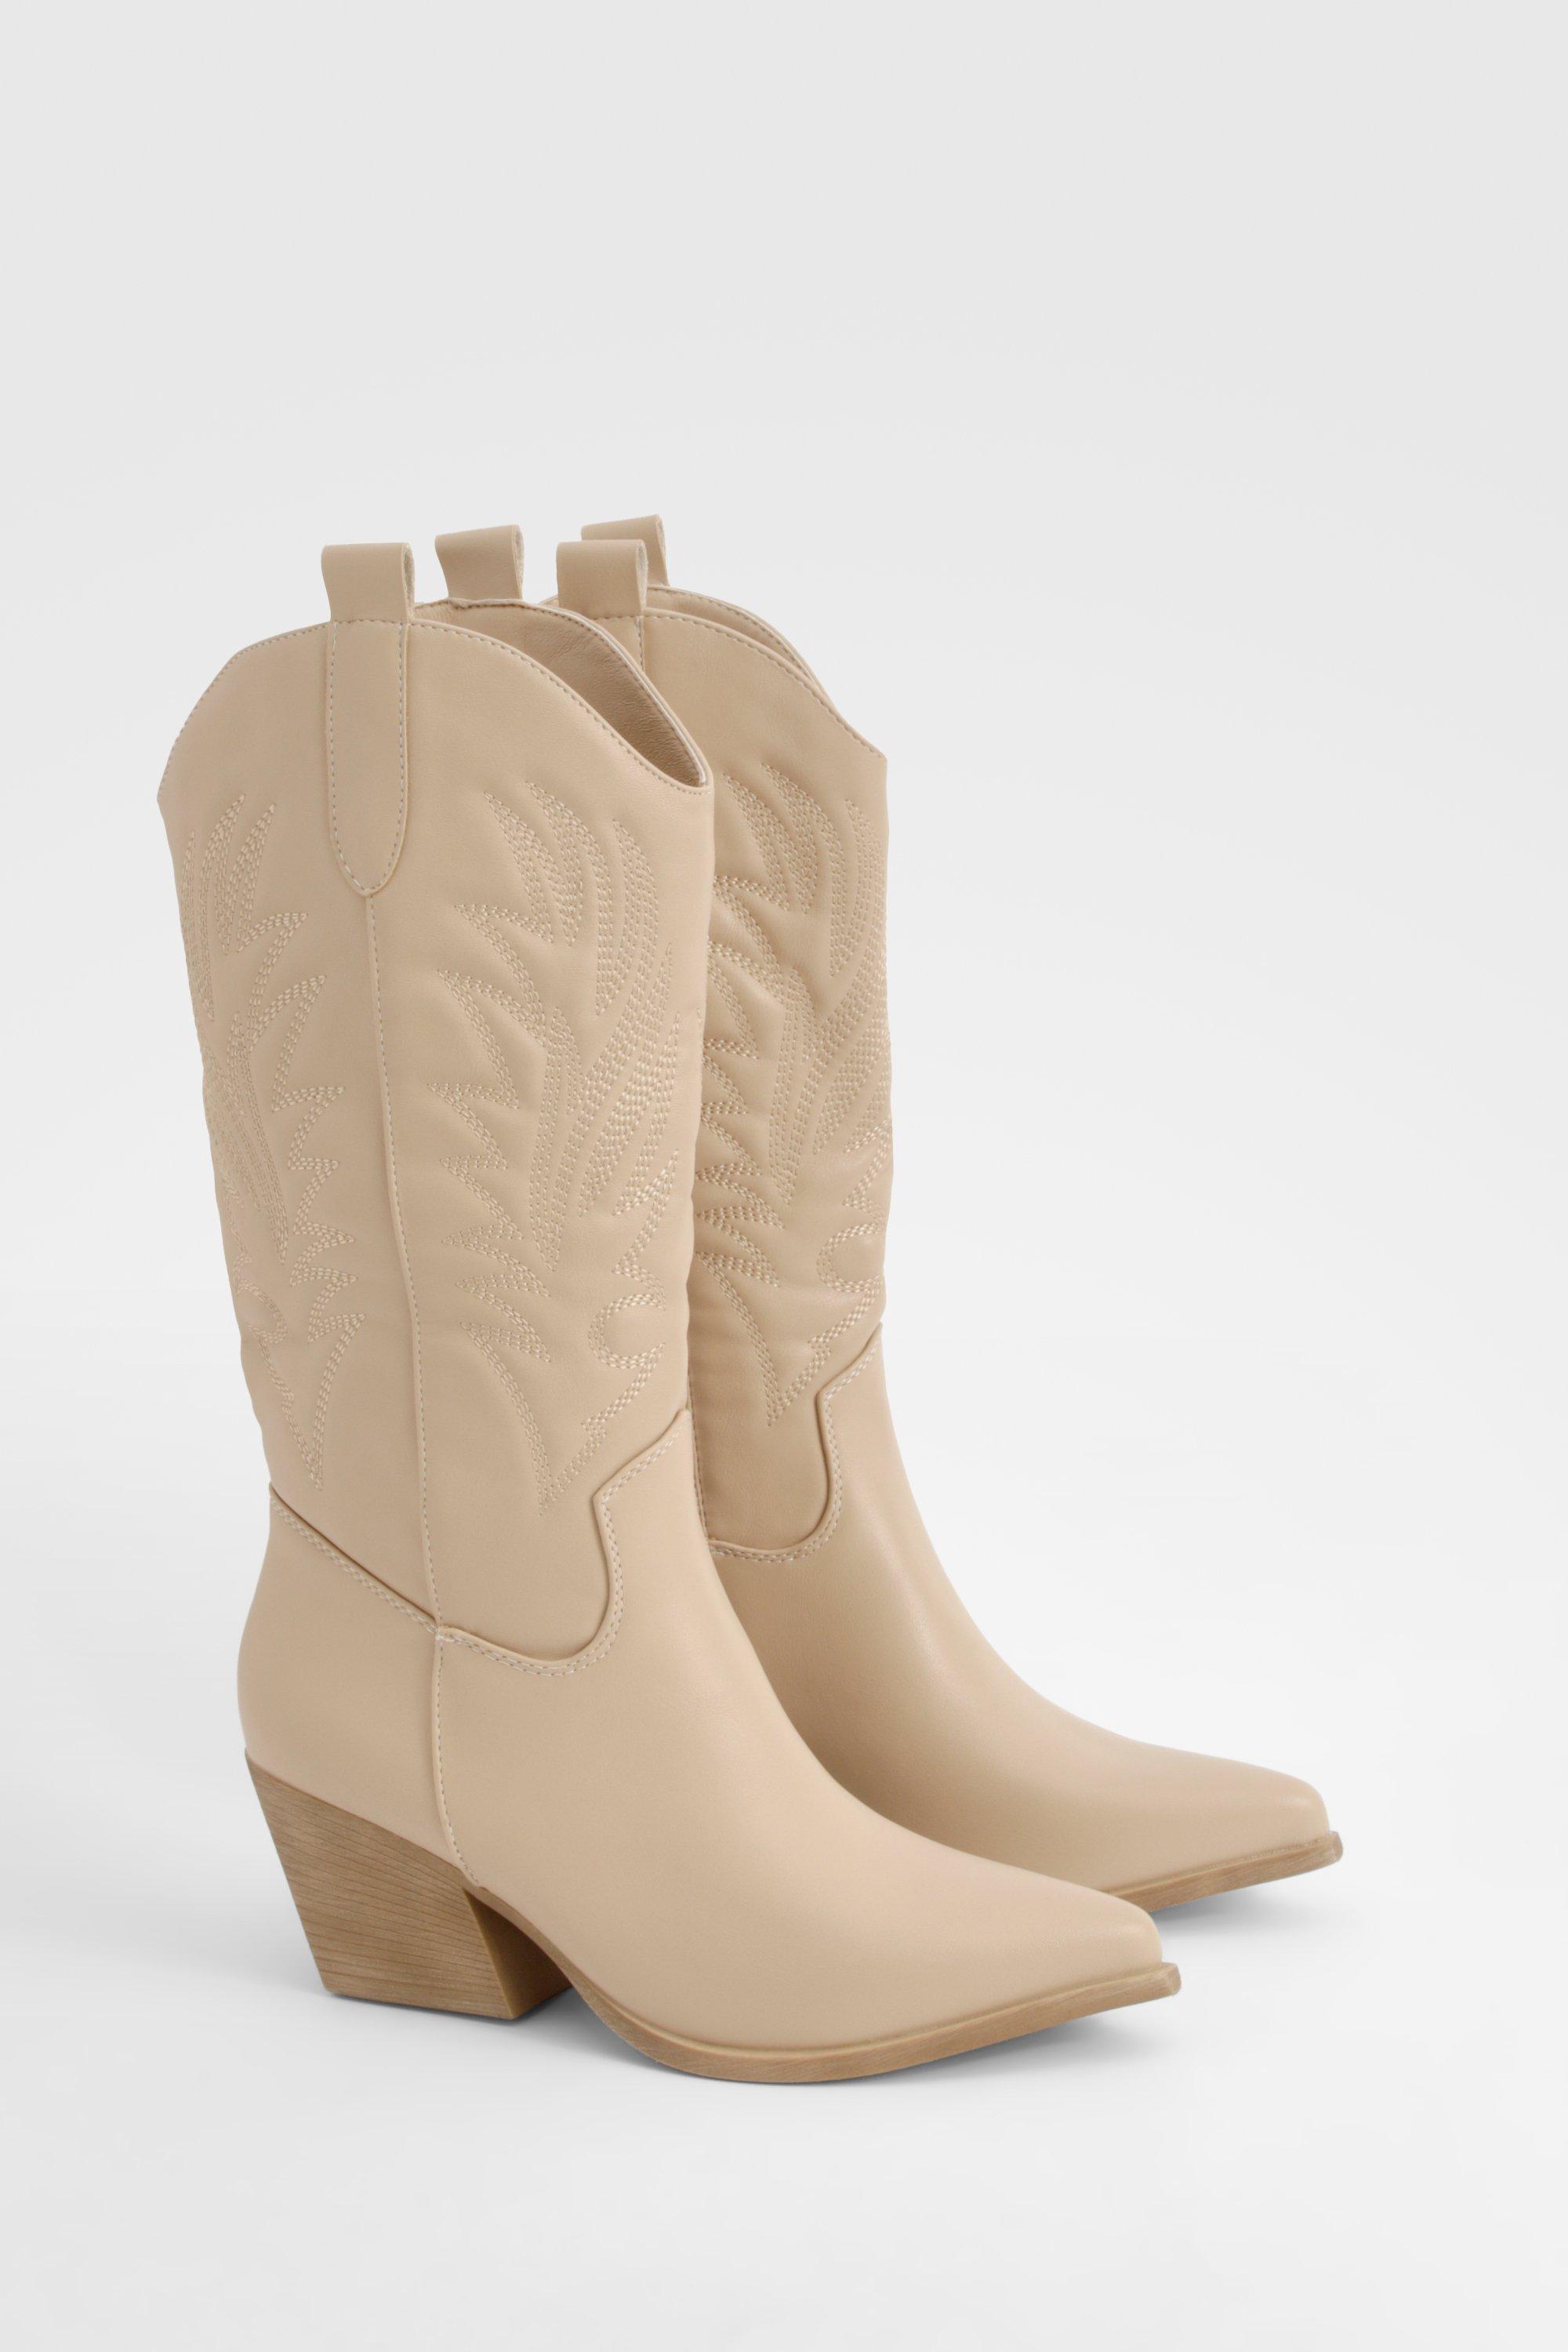 Boohoo Embroidered Knee High Western Boots, Taupe